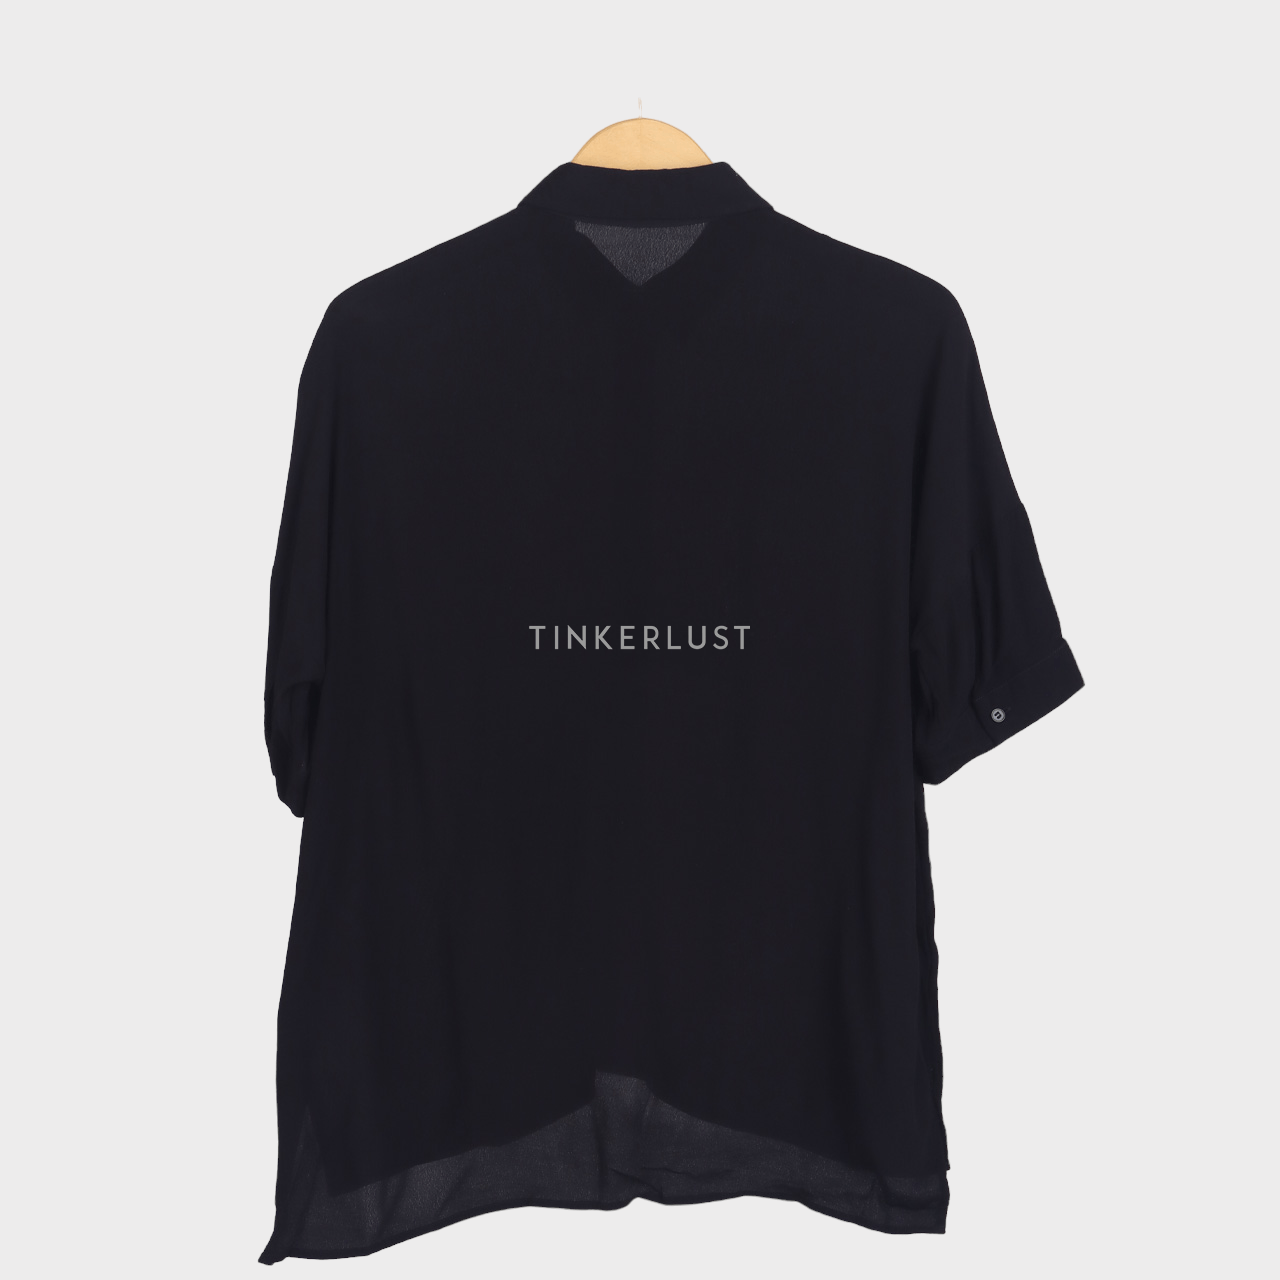 & Other Stories Black Shirt